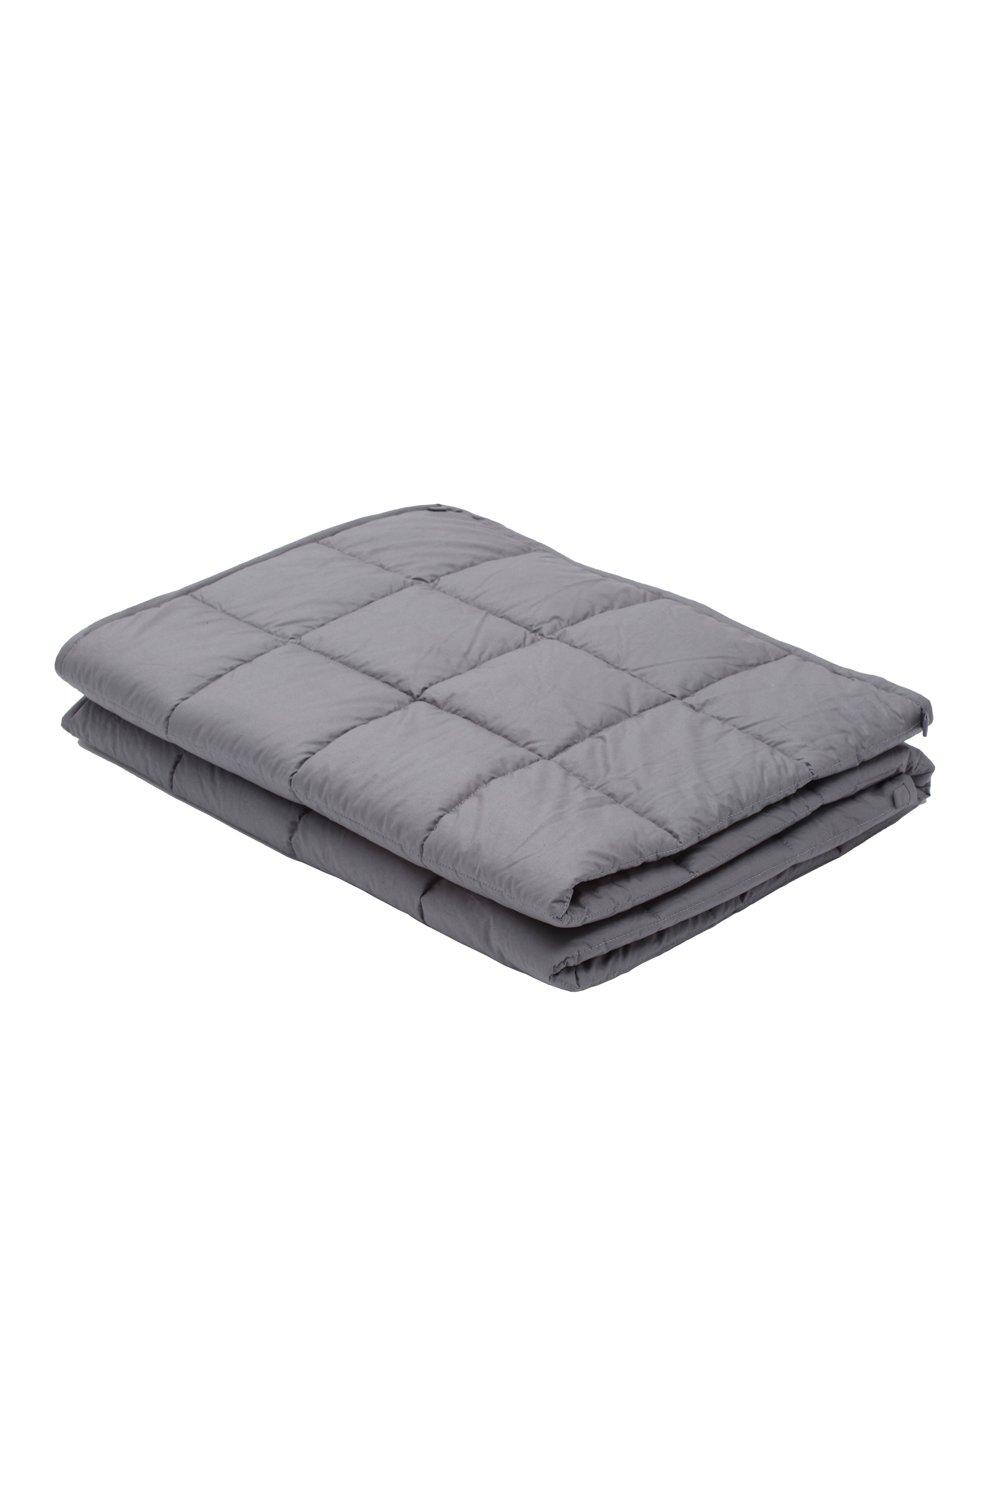 Weighted 8kg Blanket